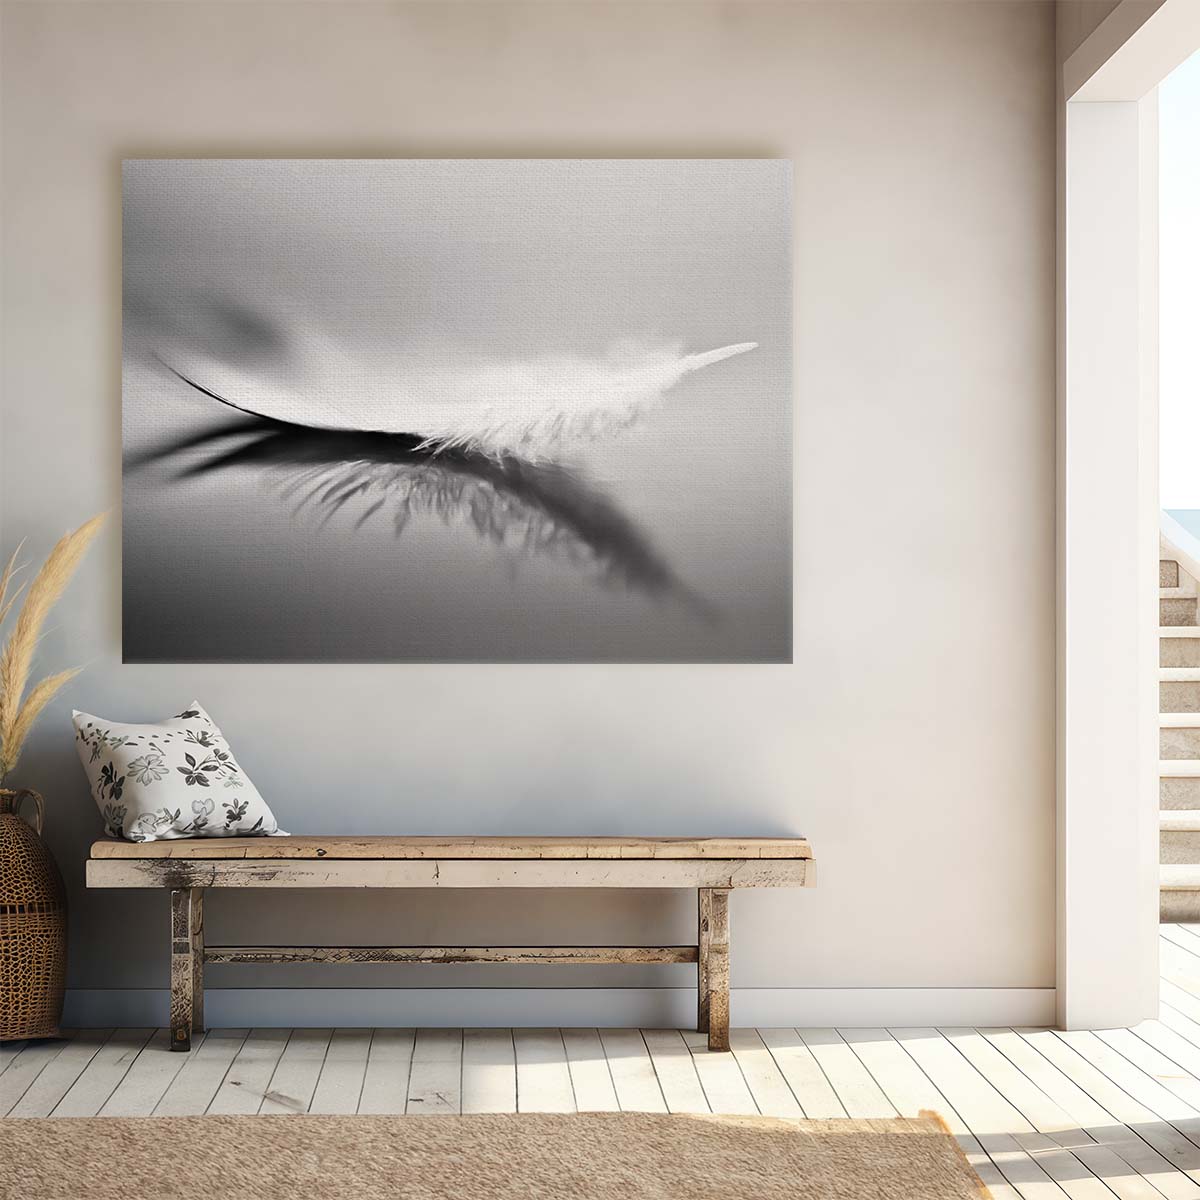 Delicate Feather Abstract Monochrome Wall Art by Luxuriance Designs. Made in USA.